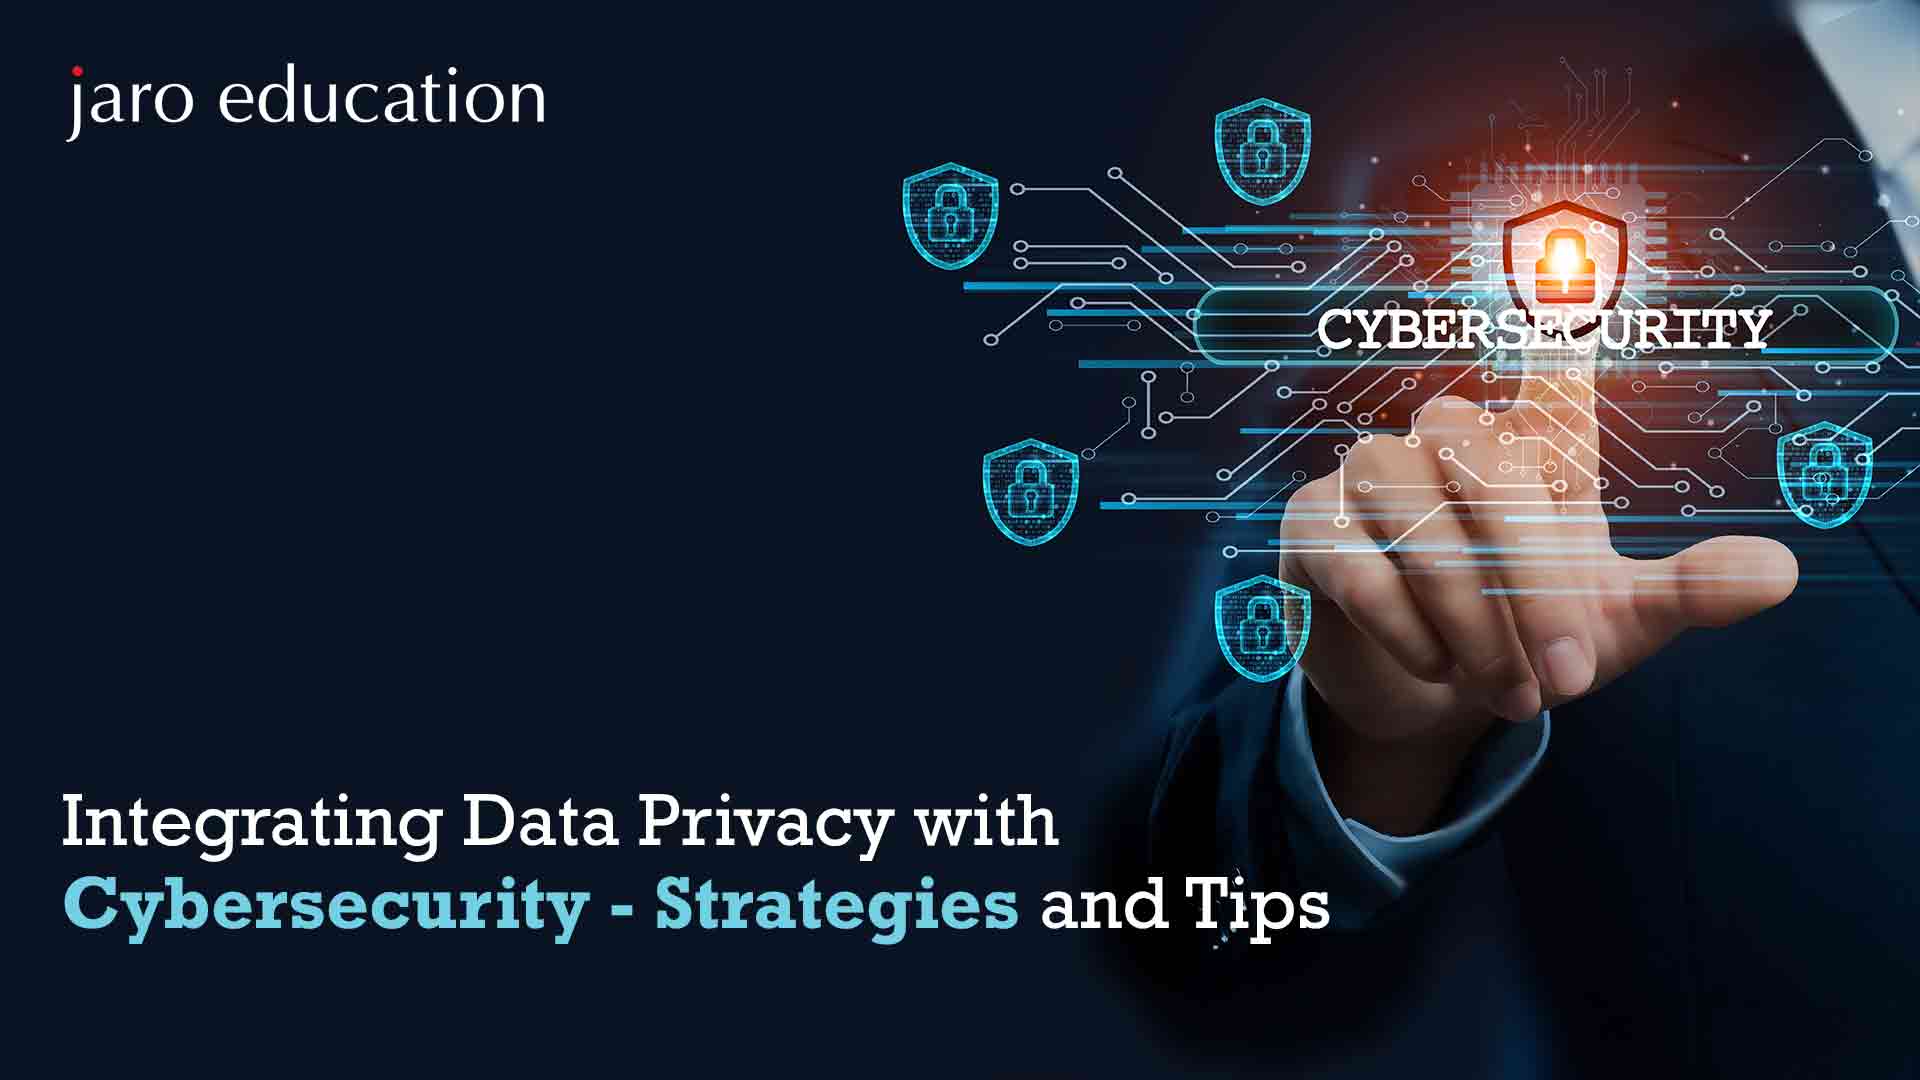 Integrating Data Privacy with Cybersecurity Strategies and Tips